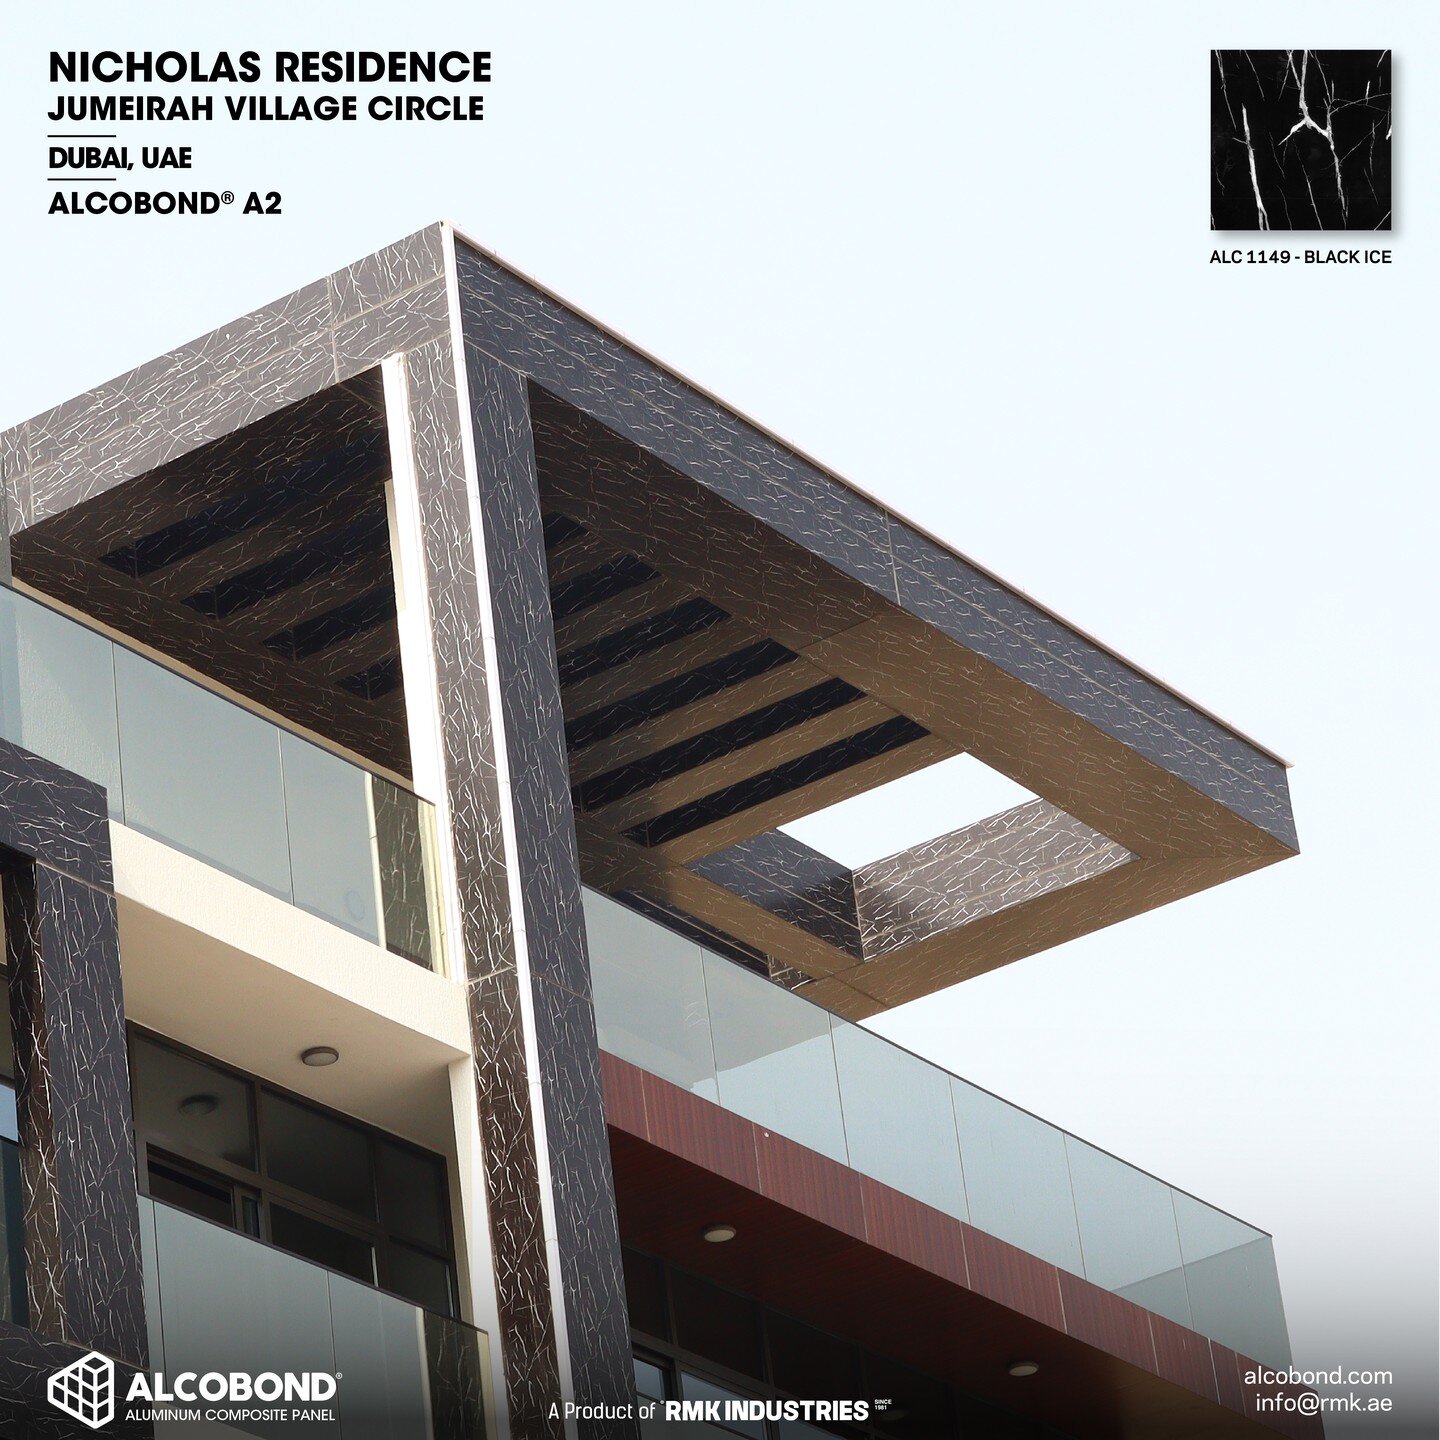 #ProjectSeries

On display is #Alcobond&rsquo;s elegant Black Ice Finish (ALC 1149) at Nicholas Residences in Jumeriah Village Circle (JVC), offering a gleaming facade that embodies the epitome of luxury and refinement. 

ALC 1149 is part of #Alcobon